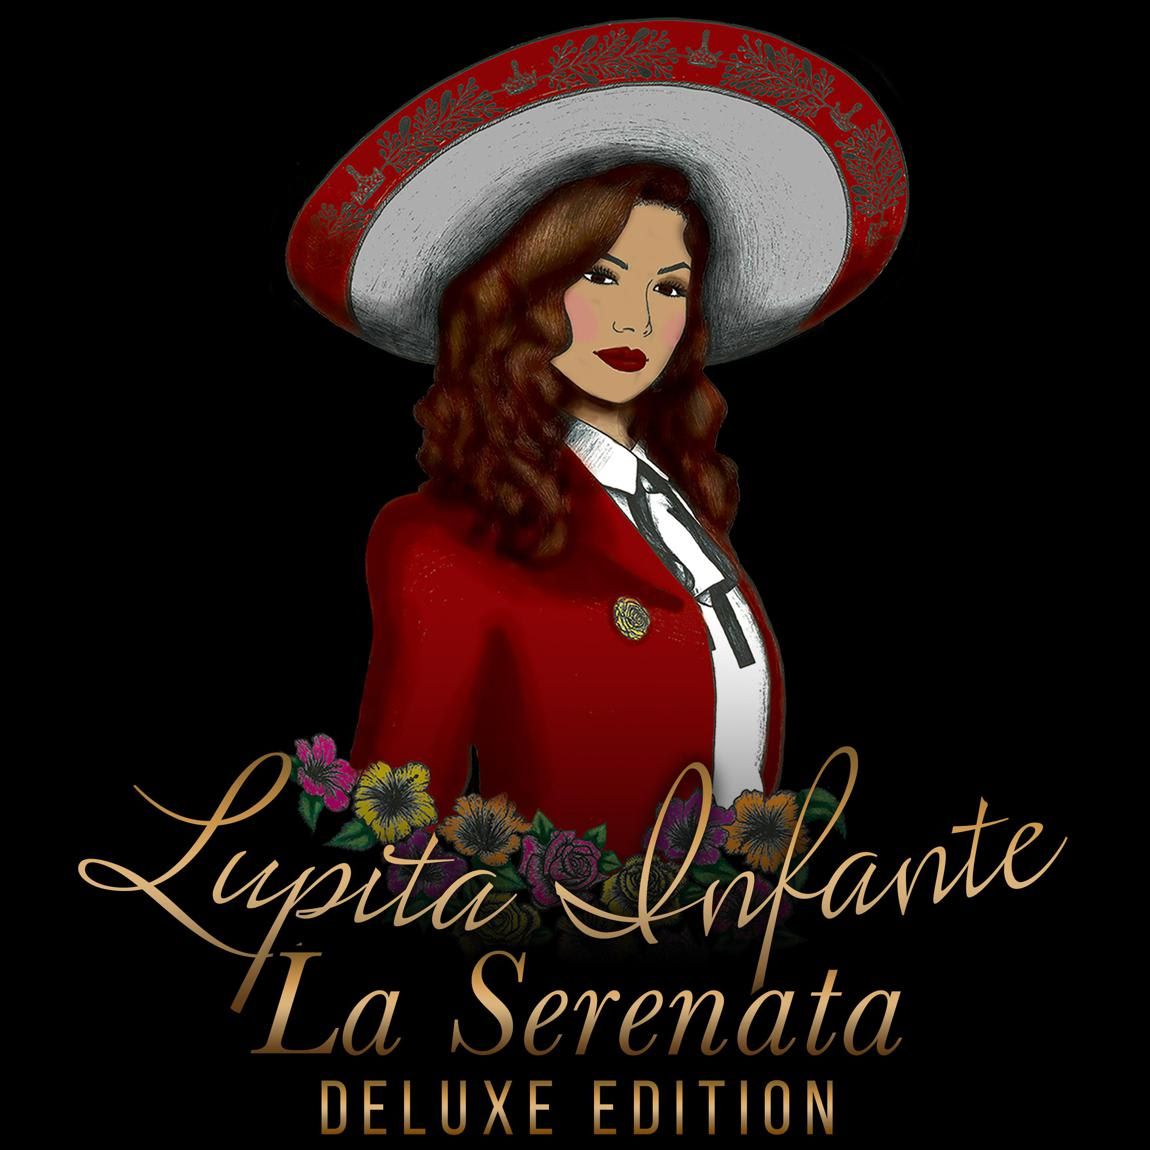 Lupita Infante, 'La Serenata' Deluxe Version is available in all music platforms